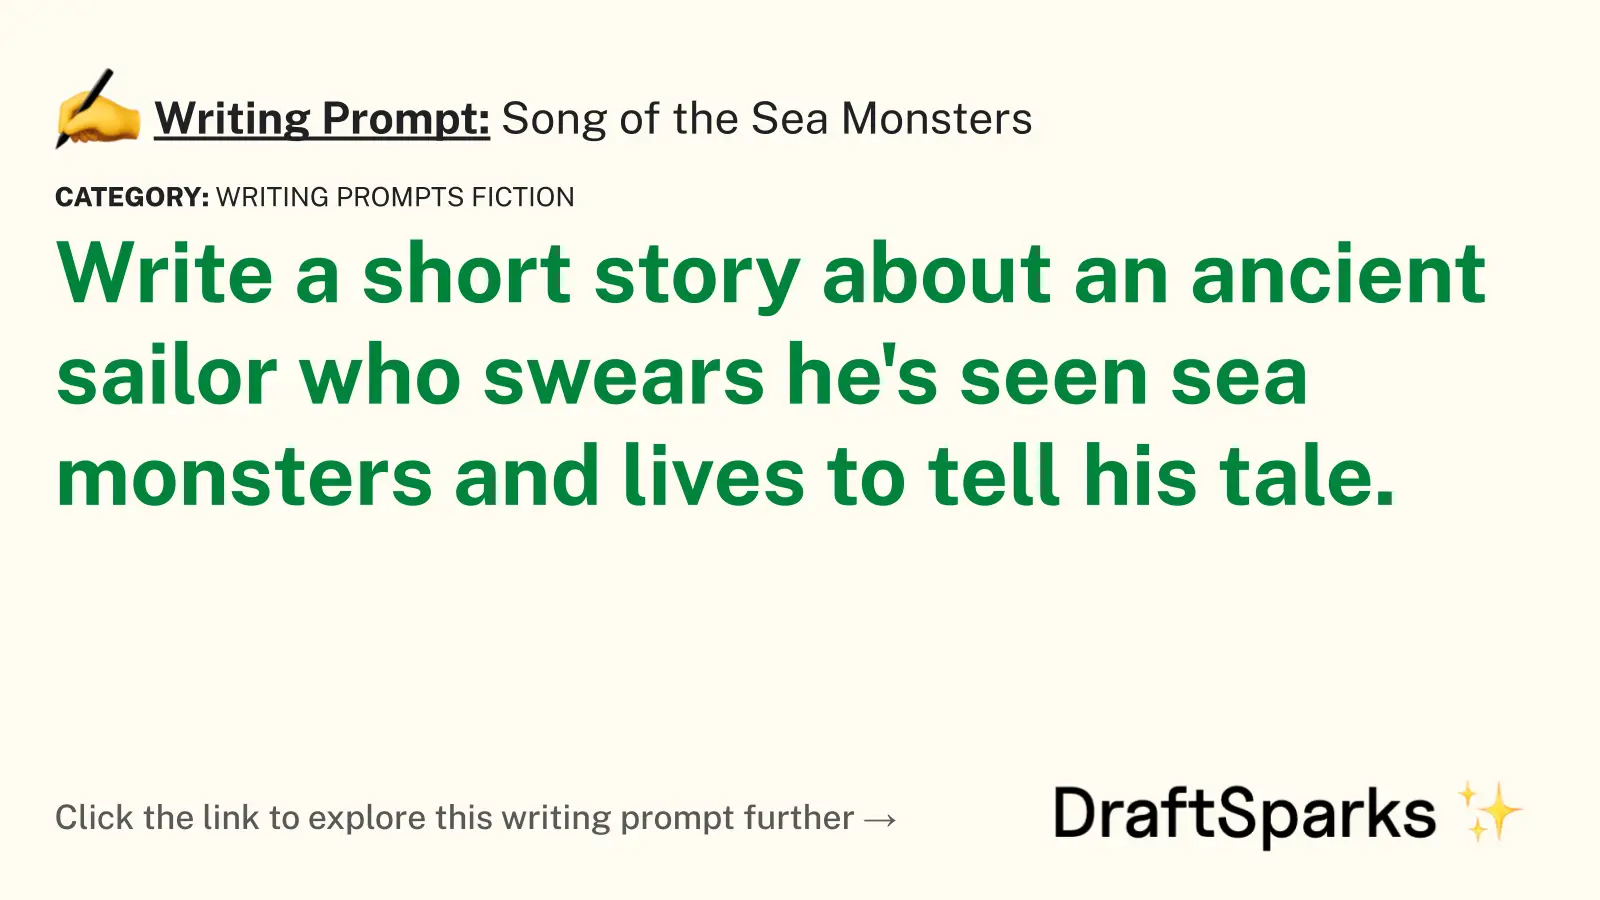 Song of the Sea Monsters